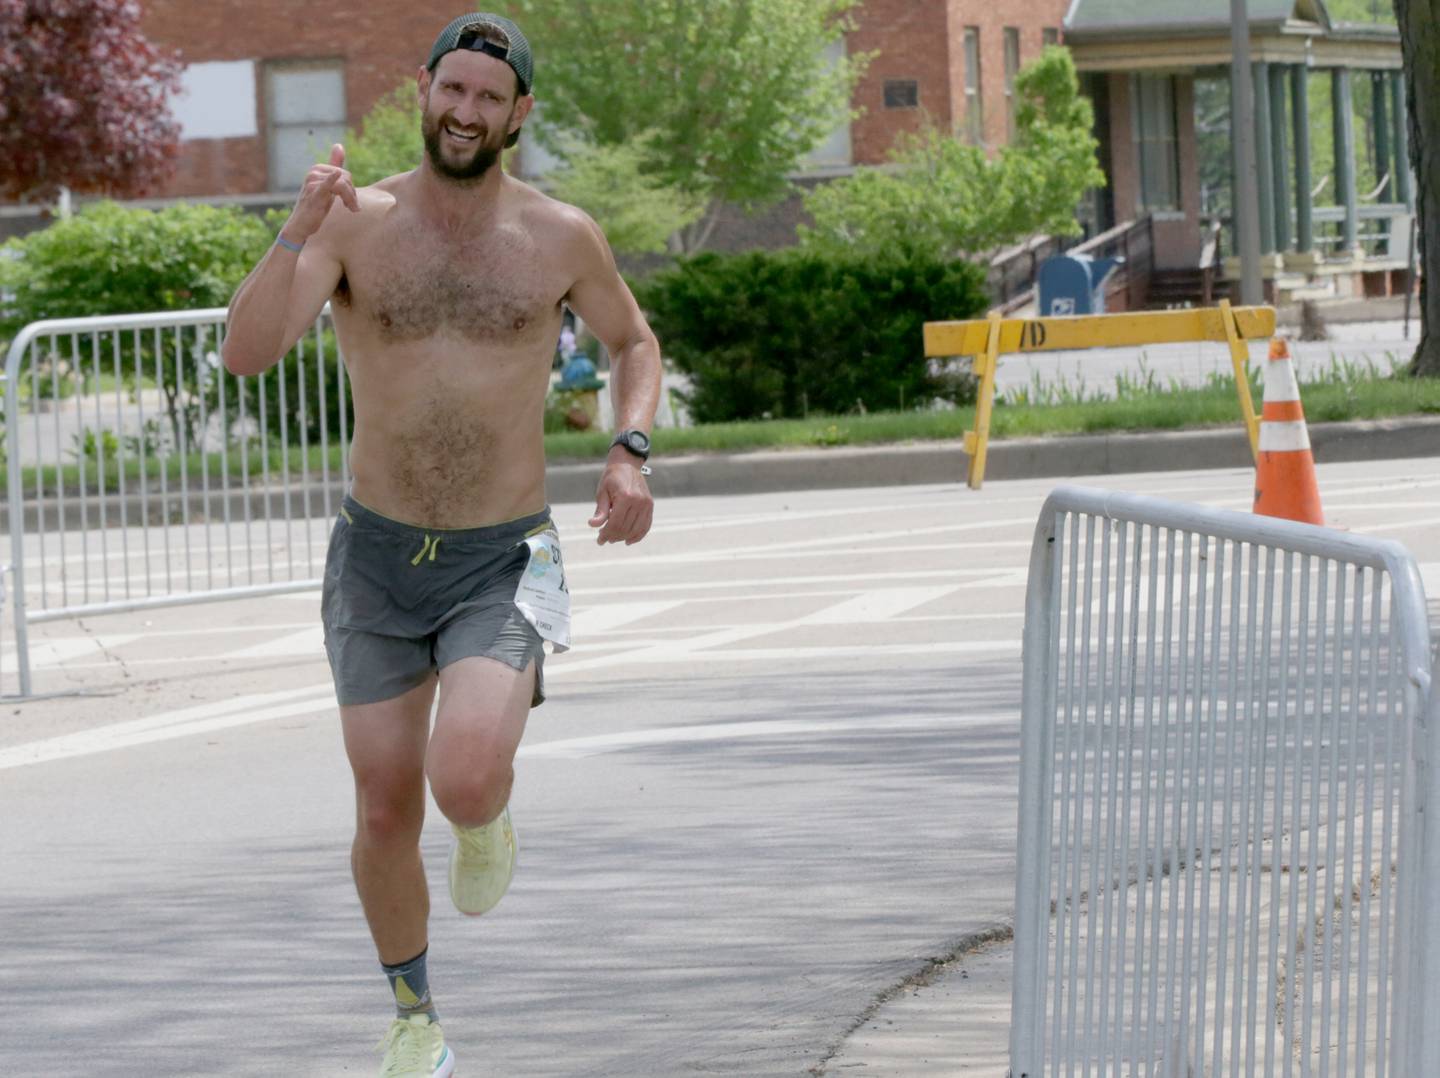 Steven Holcomb, of Streator, rounds the last turn before coming to the finish line during the Starved Rock Marathon and Half Marathon on Saturday, May 14, 2022, in Ottawa.